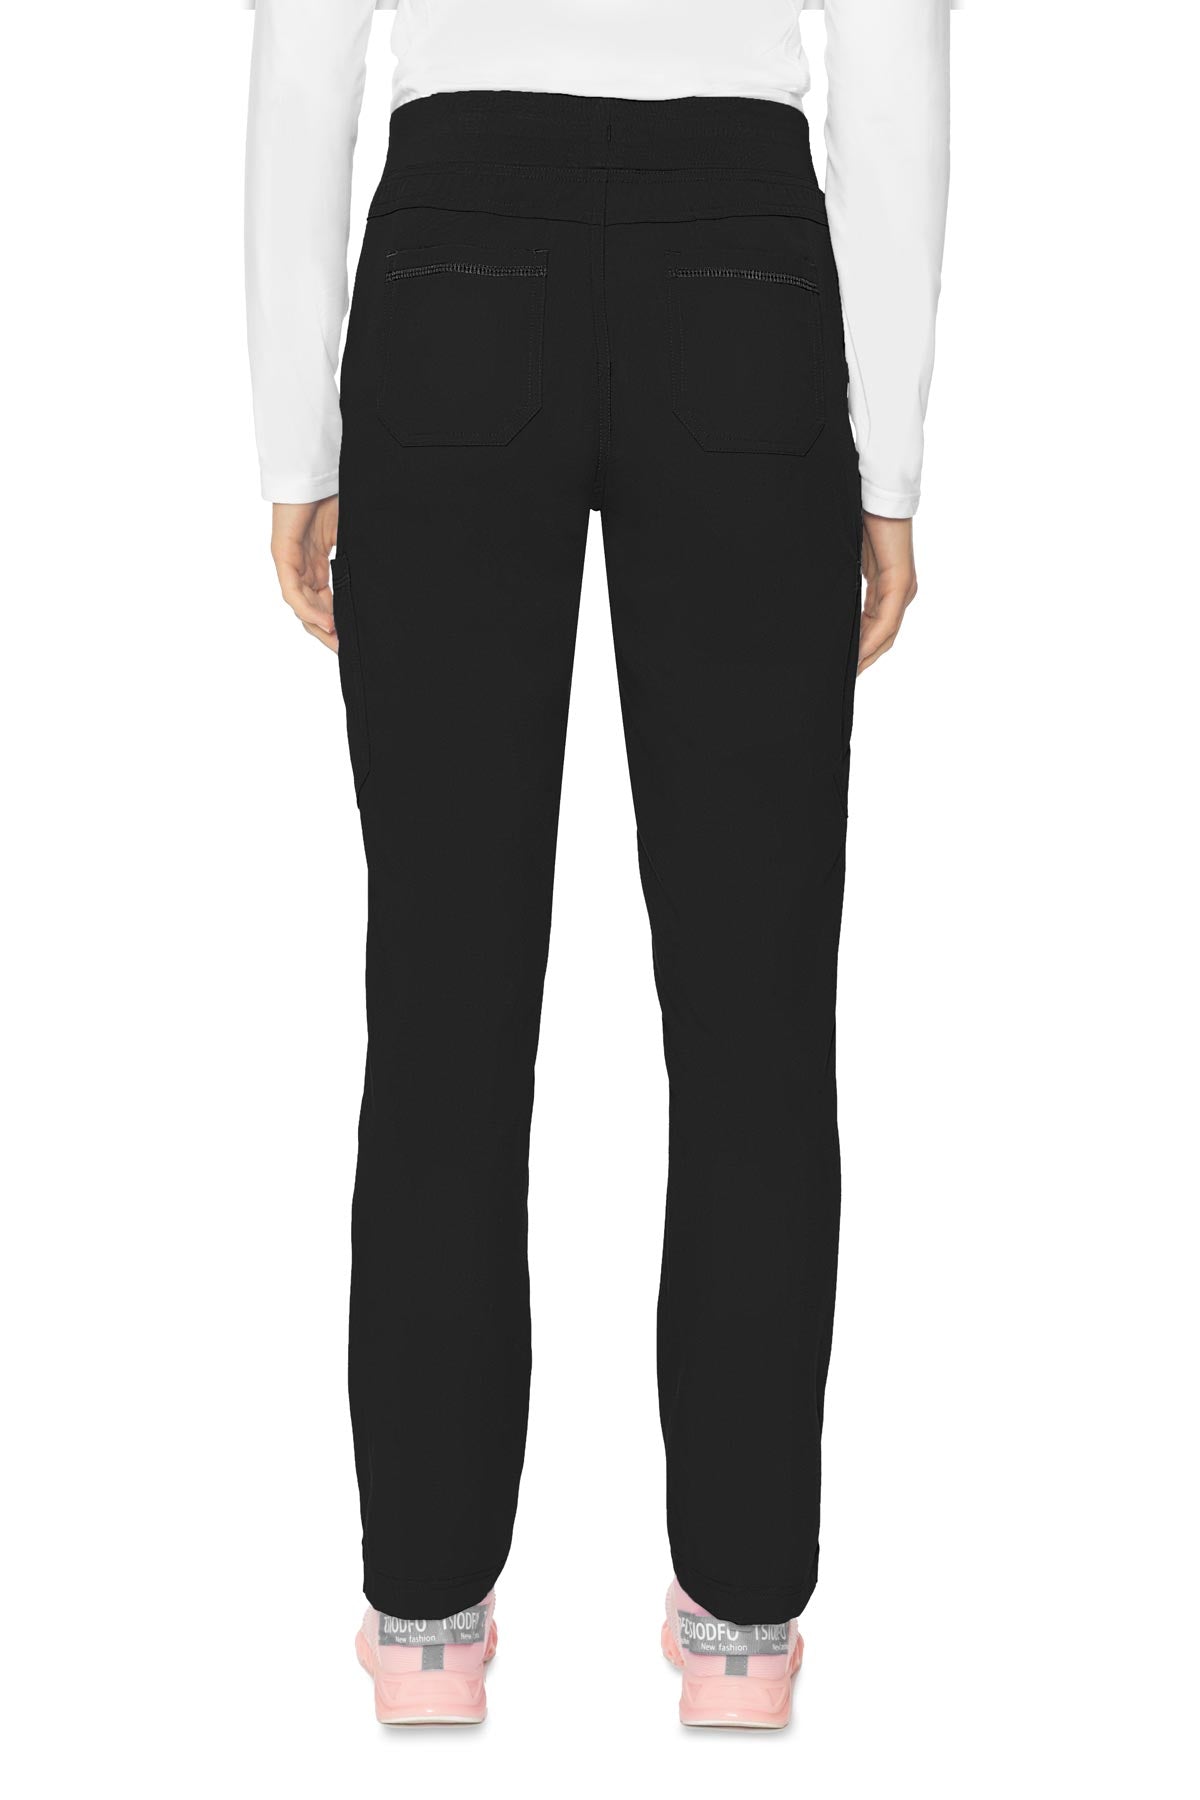 Med Couture Touch 7725 Women's Yoga 2 Cargo Pant Black Back